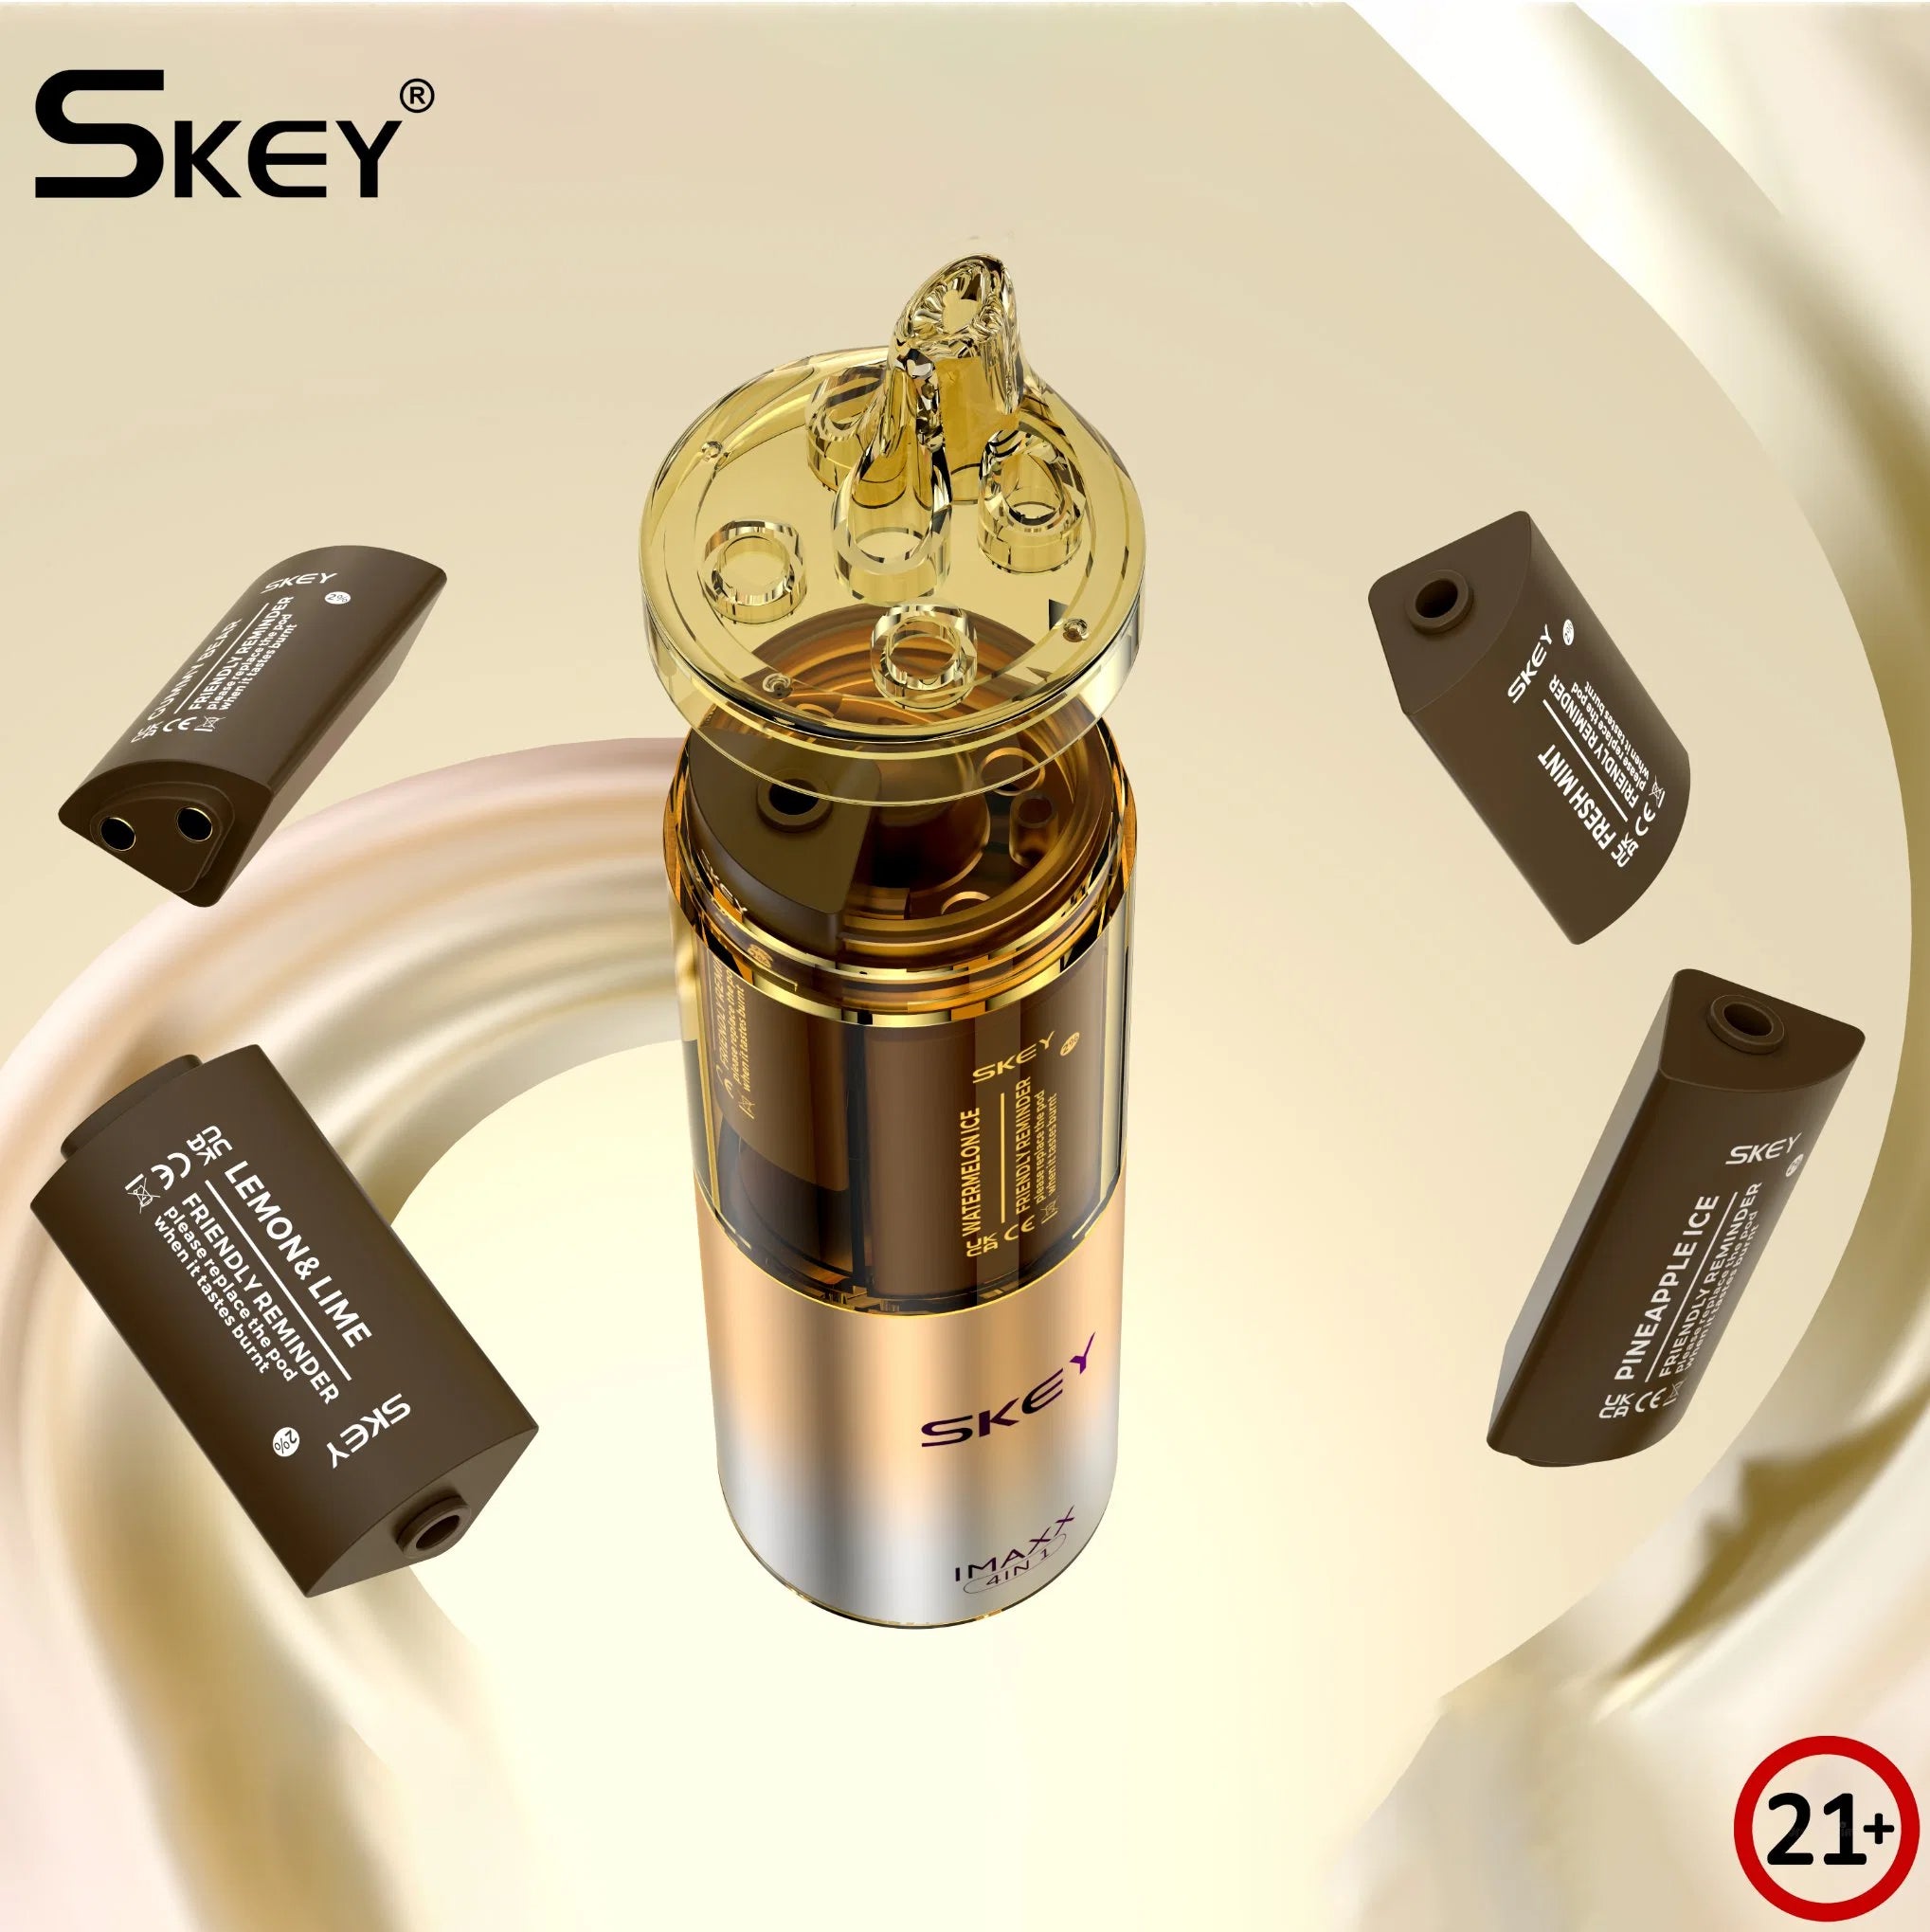 SKEY Imaxx 2800 Puffs 4-IN-1 Pod Device System Wholesale